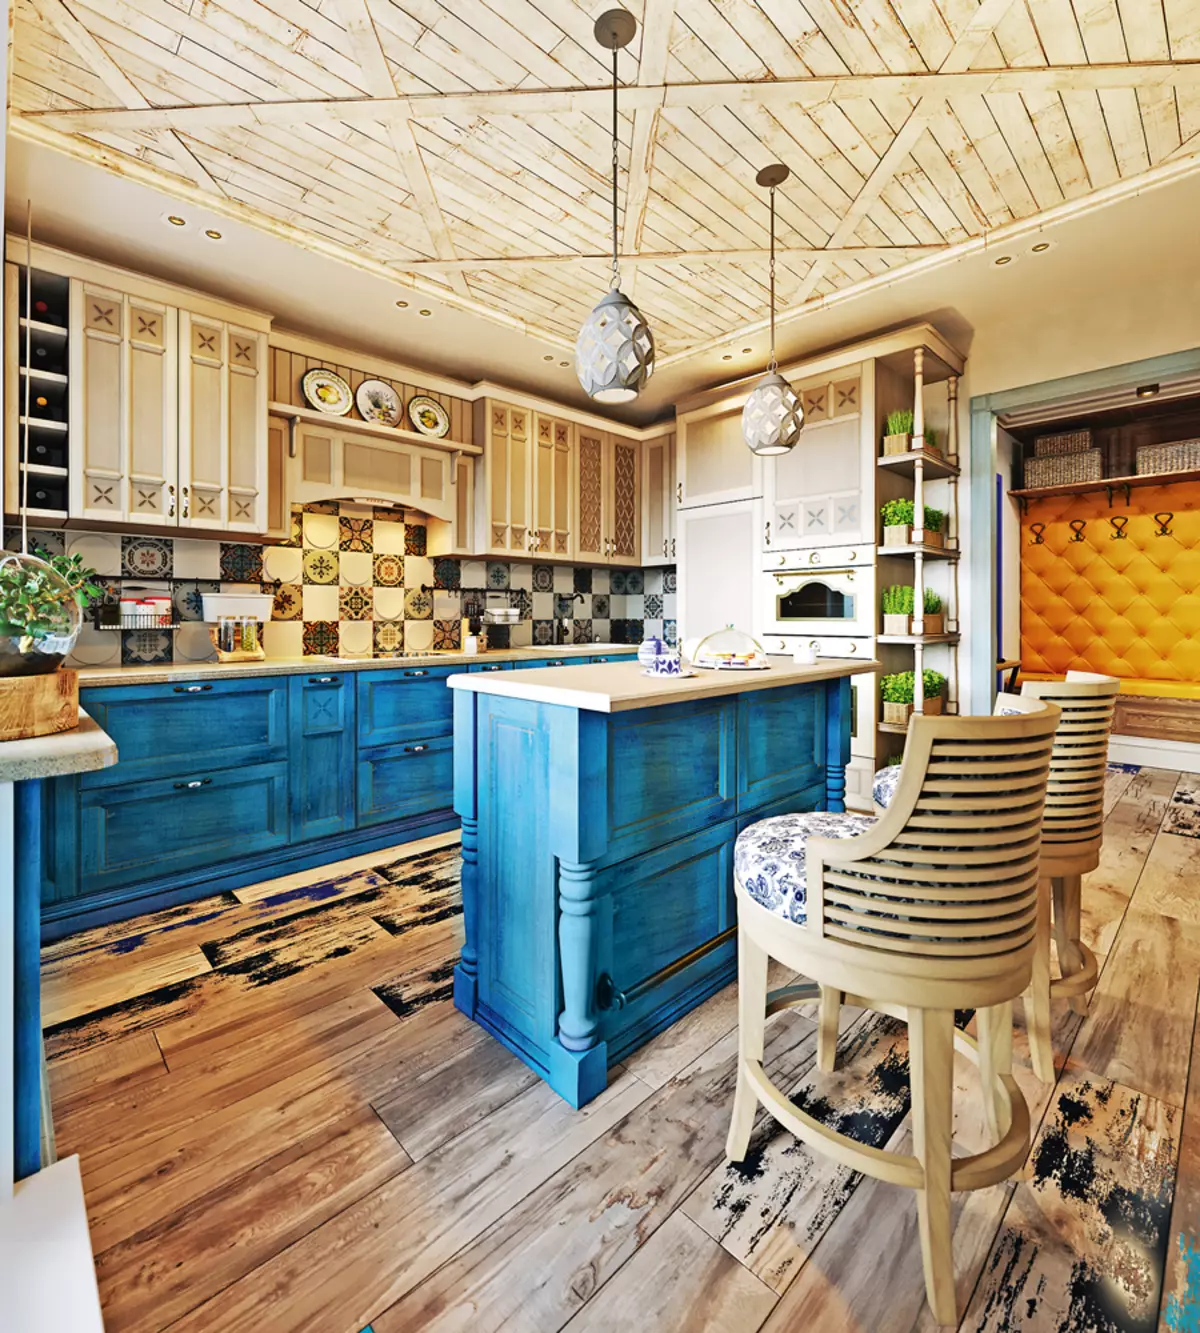 Kitchens: 12 Projects